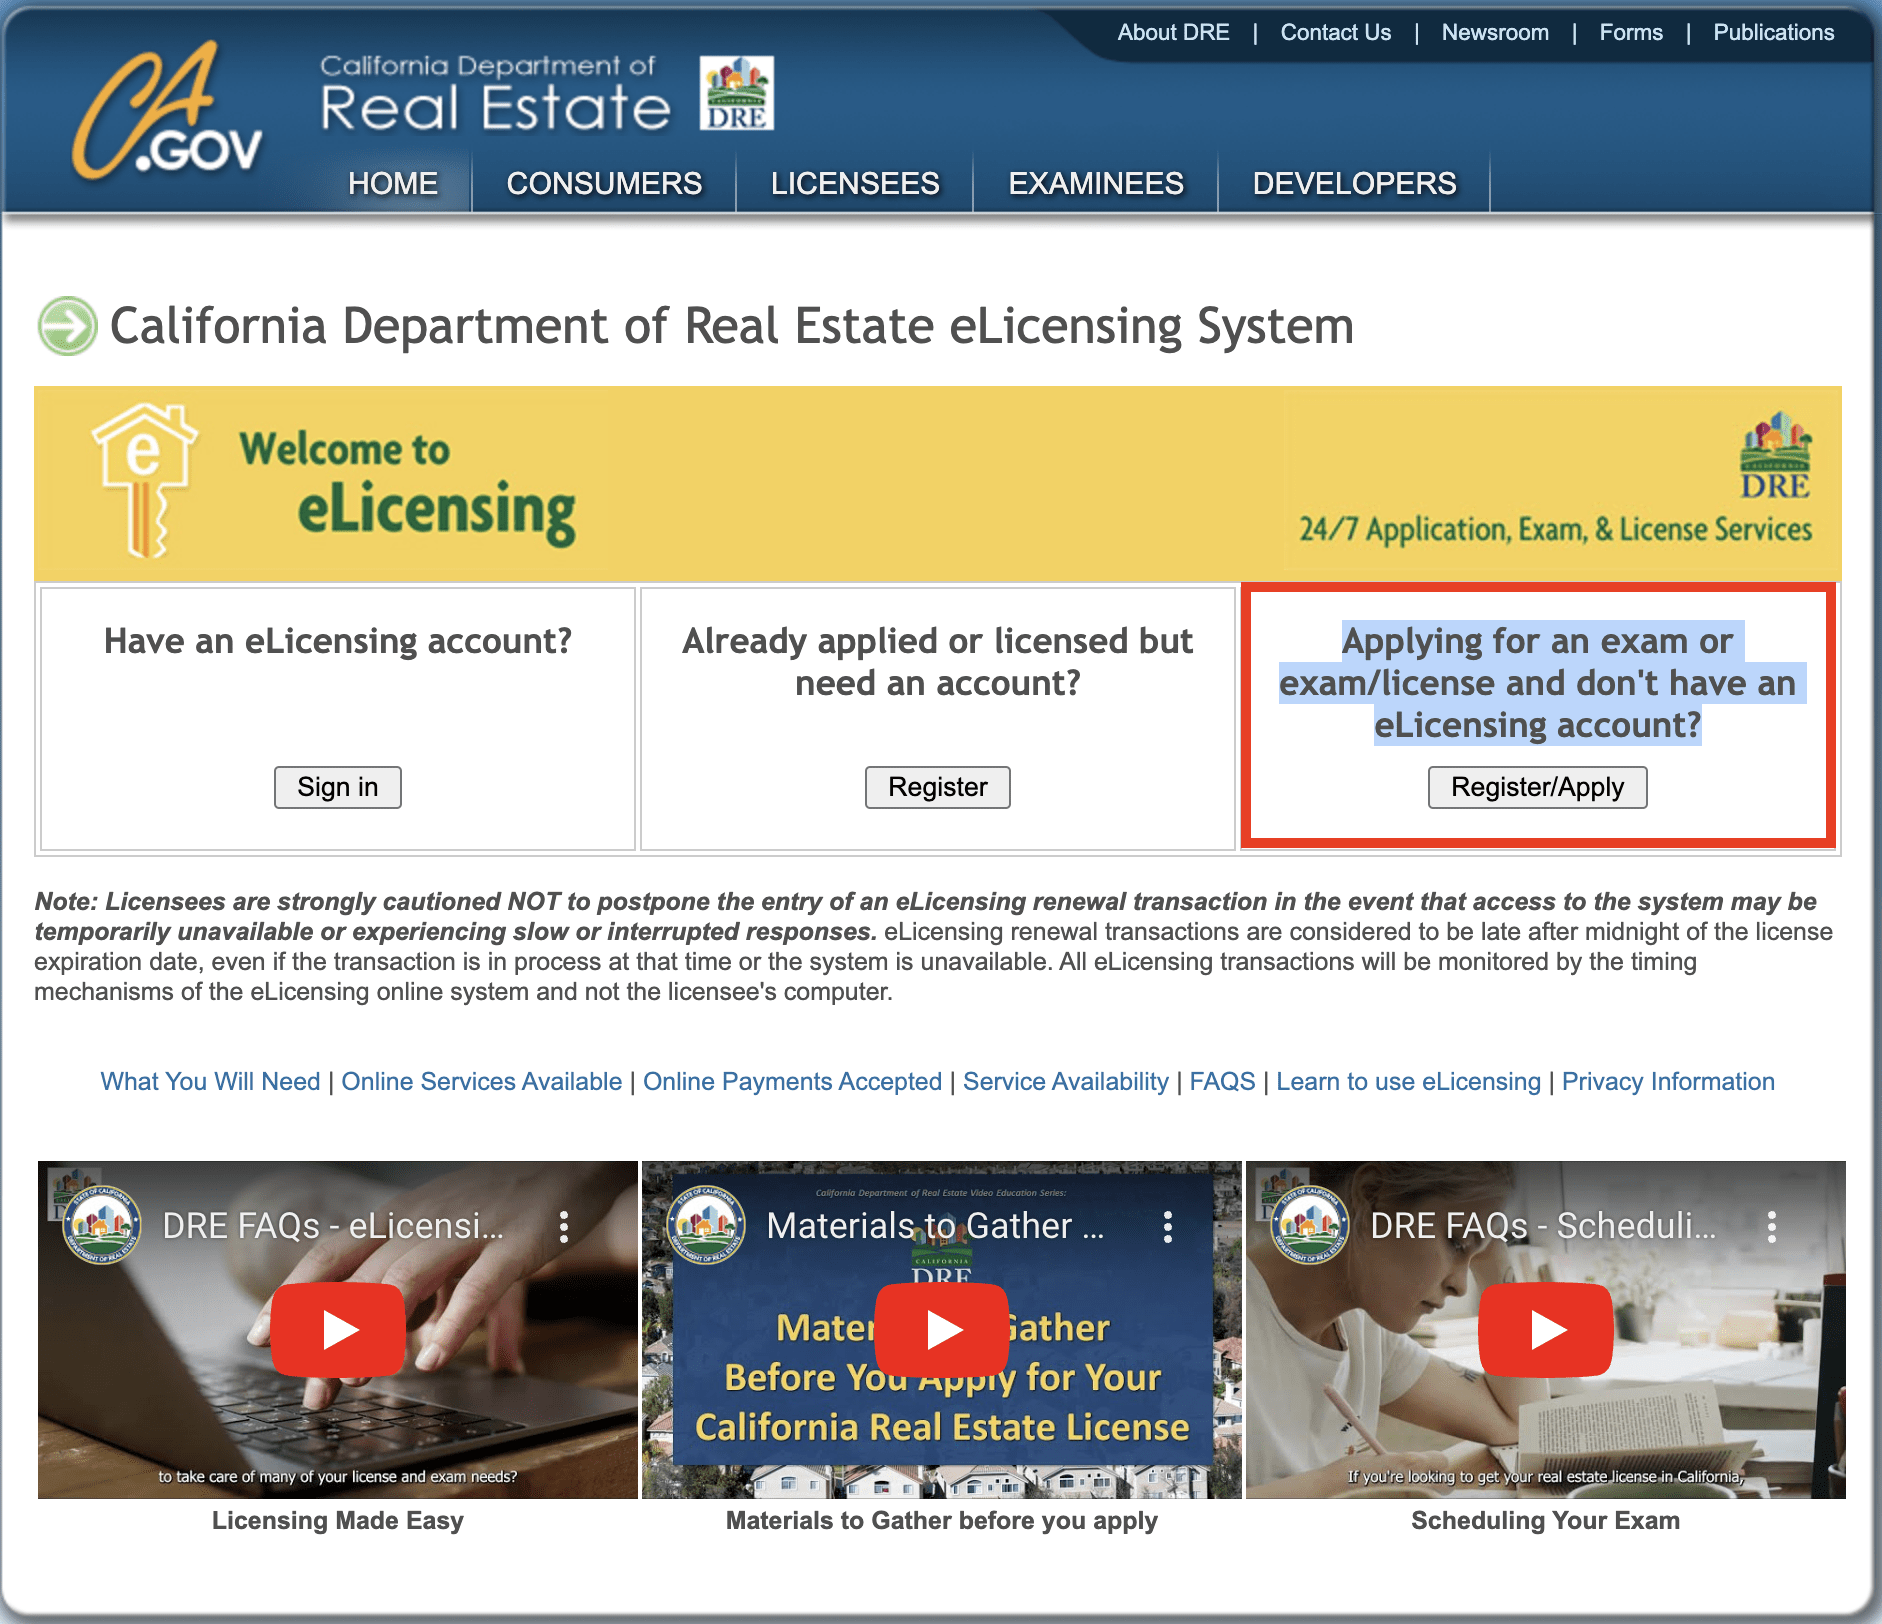 California Department of Real Estate eLicensing System Welcome Page